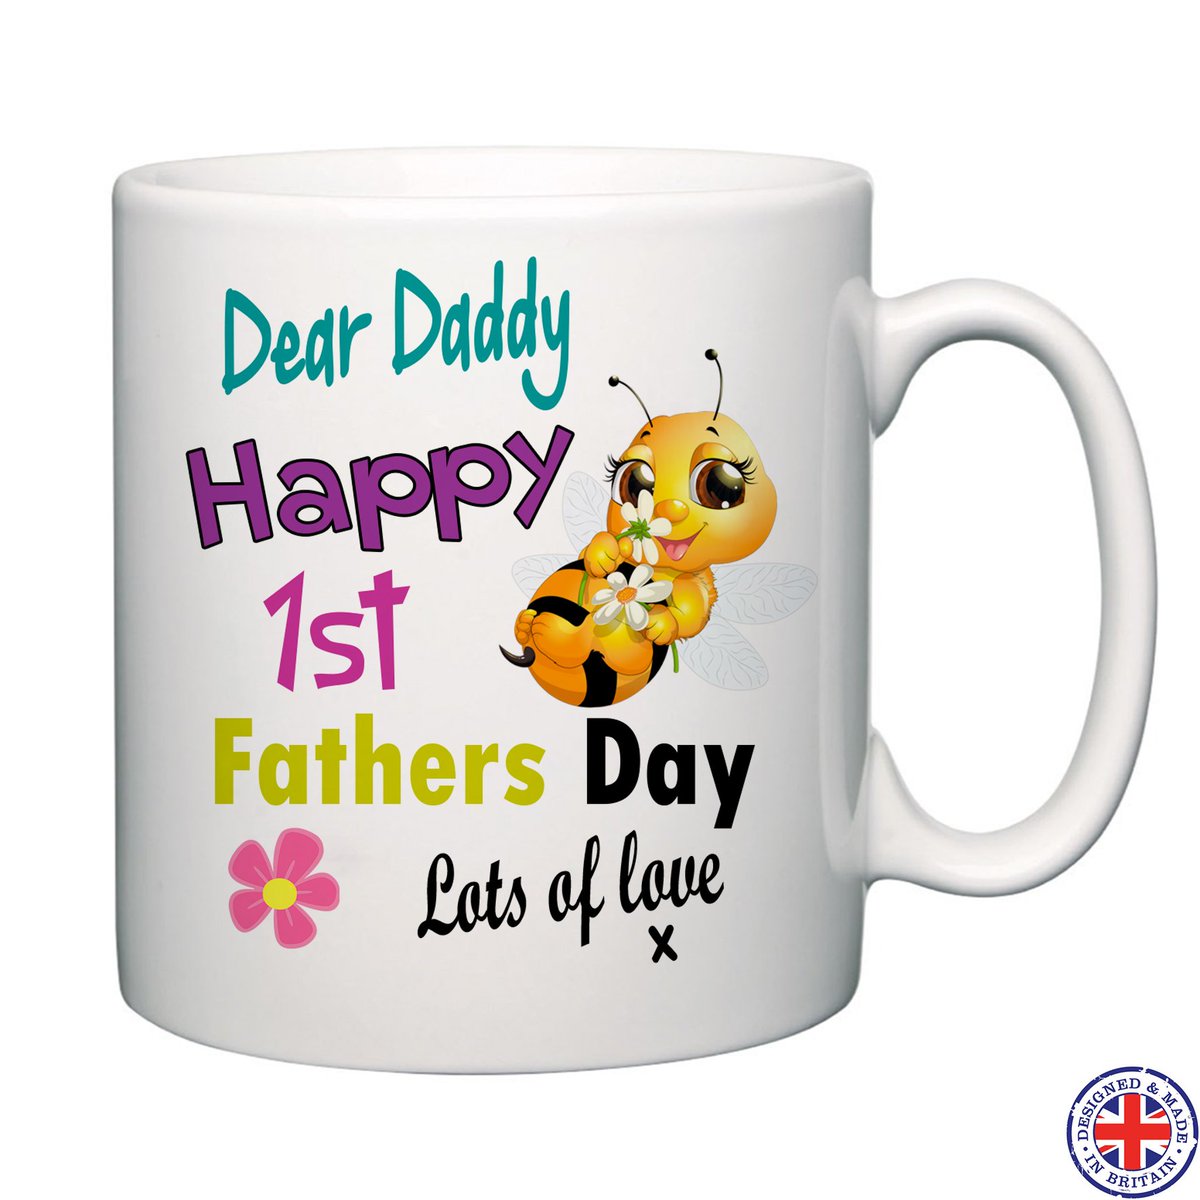 👉ebay.co.uk/itm/2829535981…👈     
😀Check out our designs😁 #happyfathersday #special #fathersday #father #dad #baby #fathergift #twitter #trending #personalised #home #coffee #office #gift #tea #cup #humour #mug #homeoffice #idealgift #novelty #drink #work #giftideas #handmade